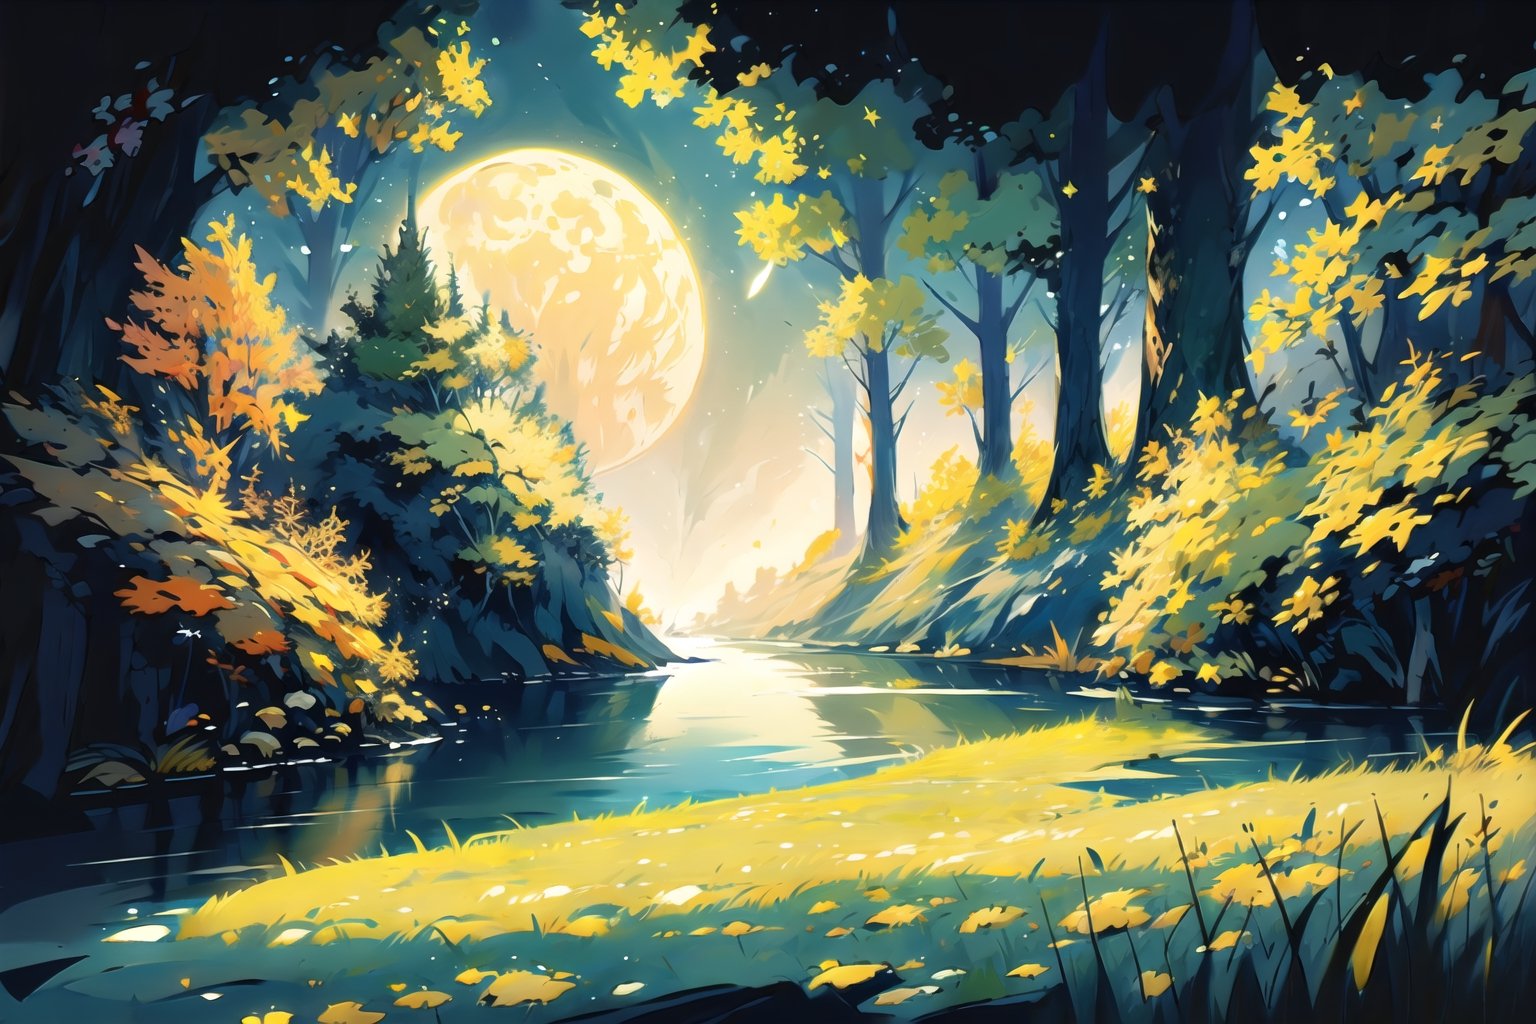 midnight, star and moon ,in the forest,  trees, river, grass ,EpicArt